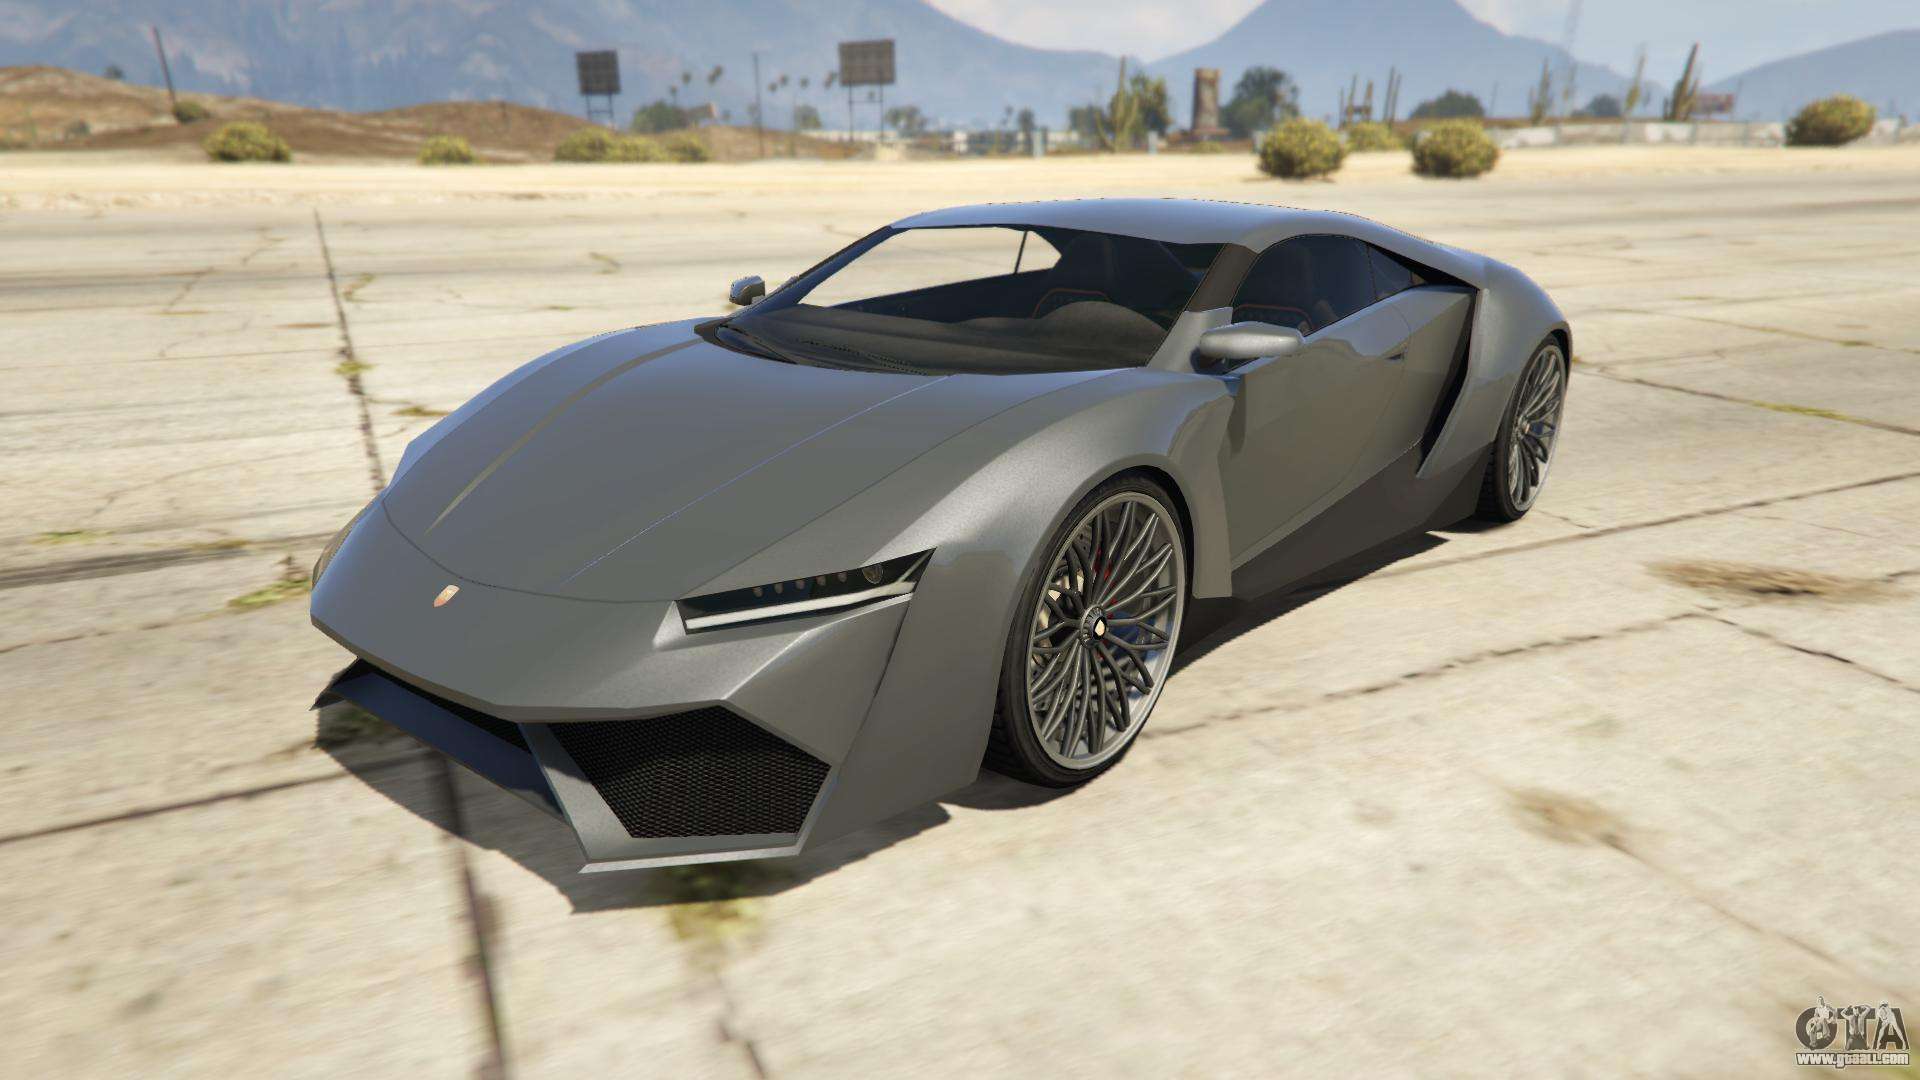 Pegassi Reaper from GTA 5 - front view